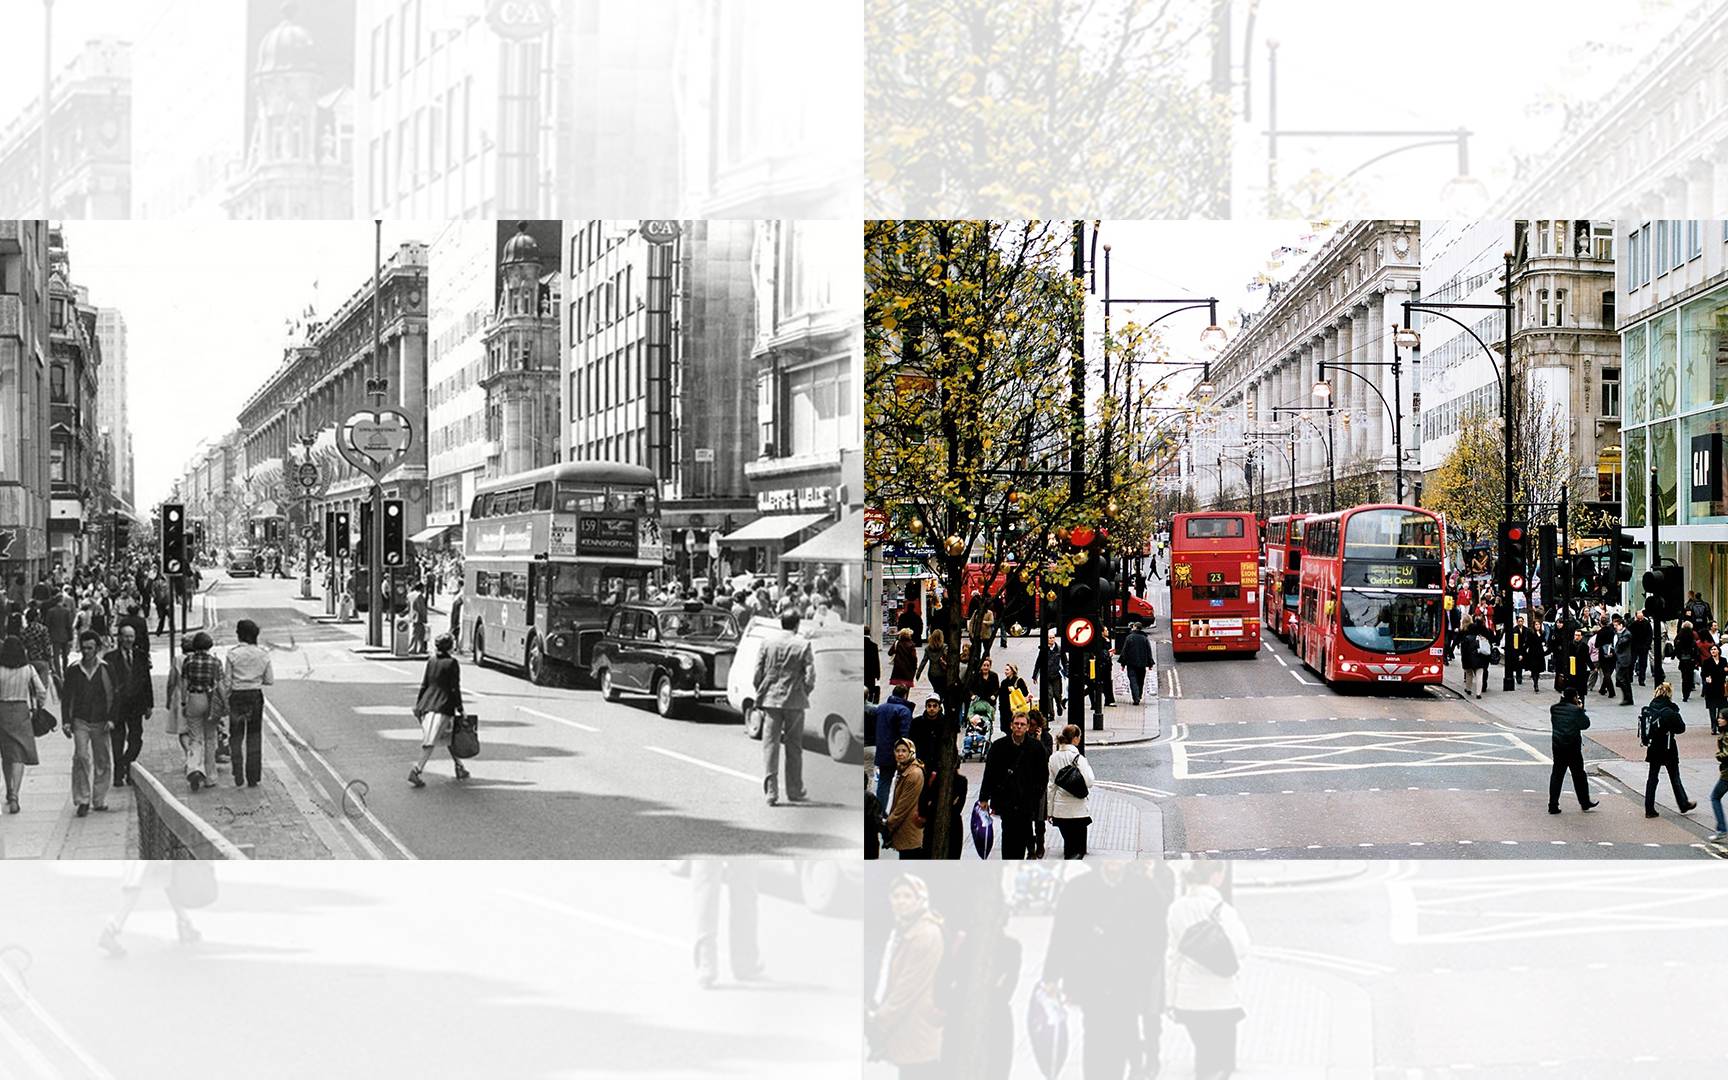 Image: Oxford Street in pre-digital (left) and digital (right) eras. Farbod Afshar Bakeshloo (2020) (Adapted from Wikipedia and Evening Standard)